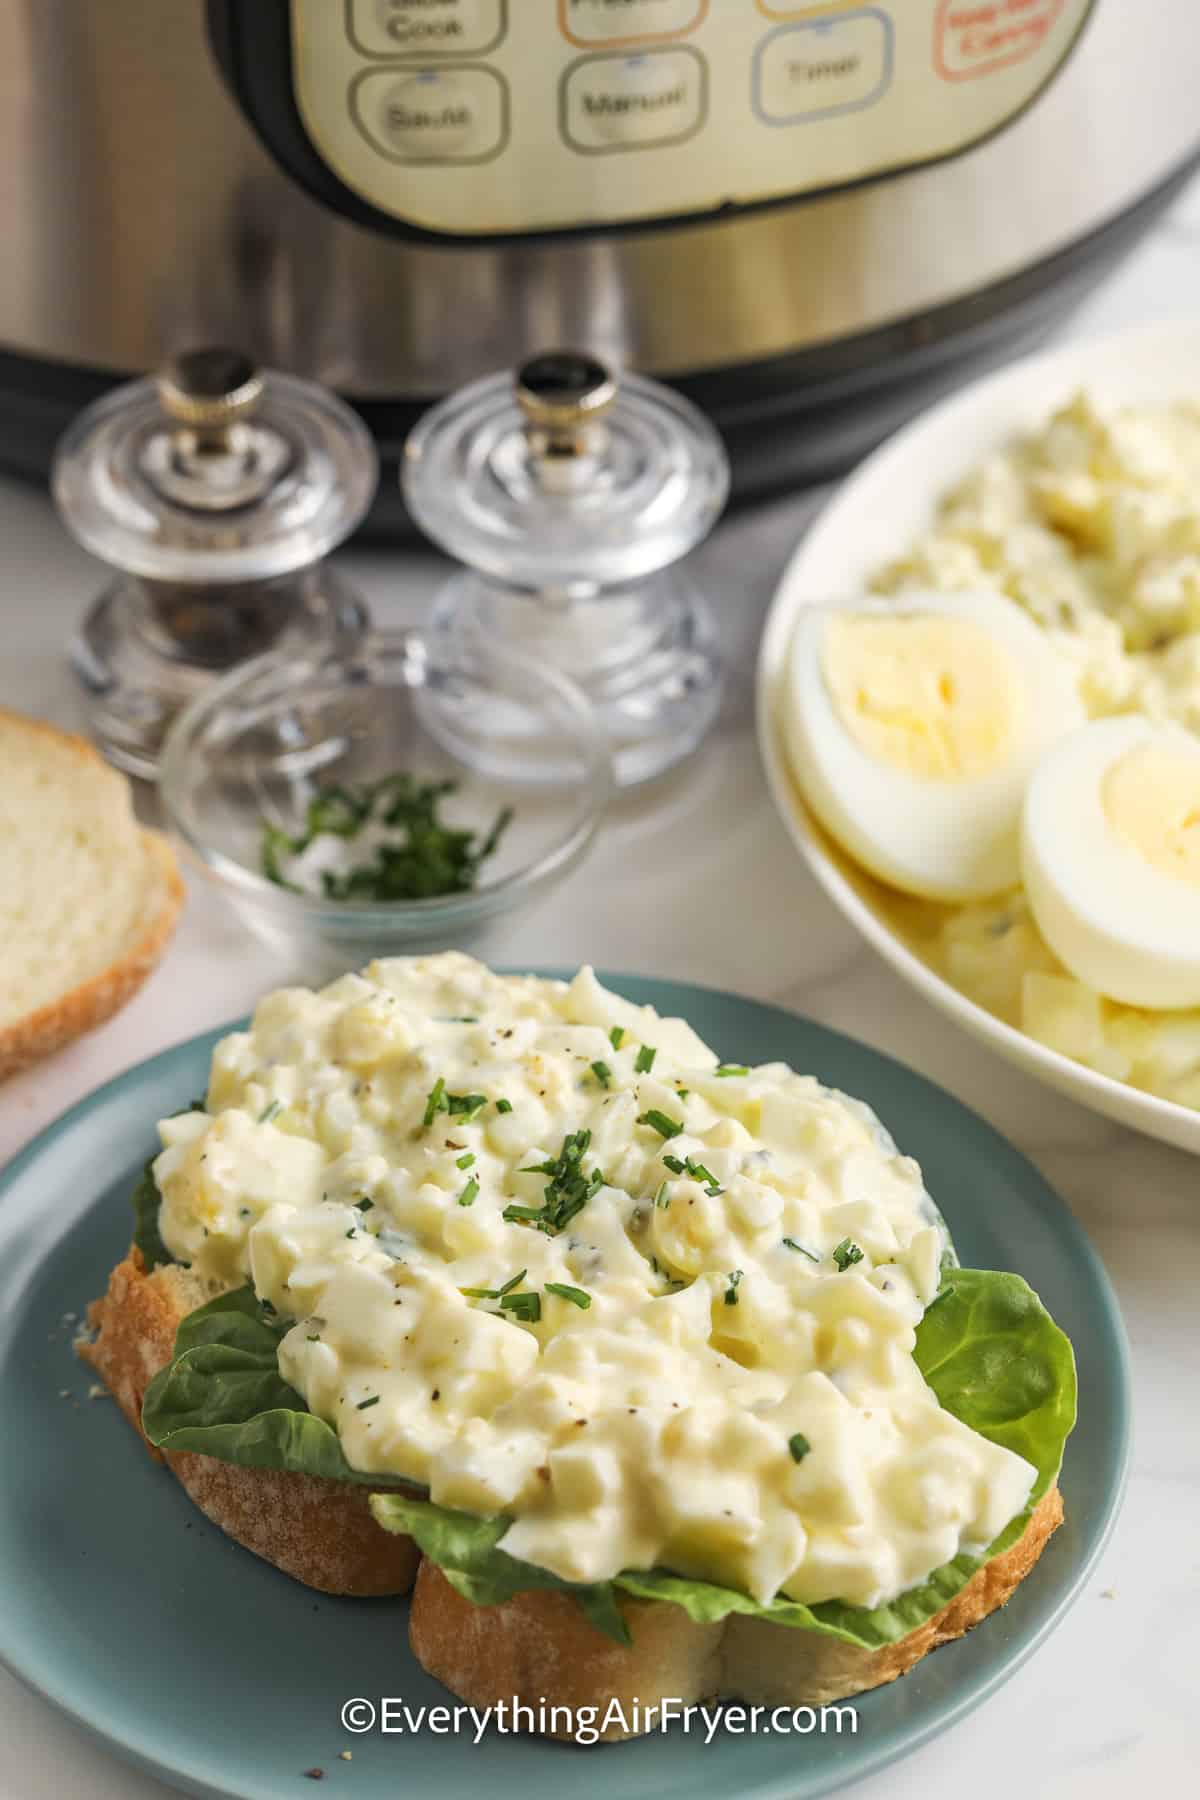 egg salad on a piece of bread with lettuce